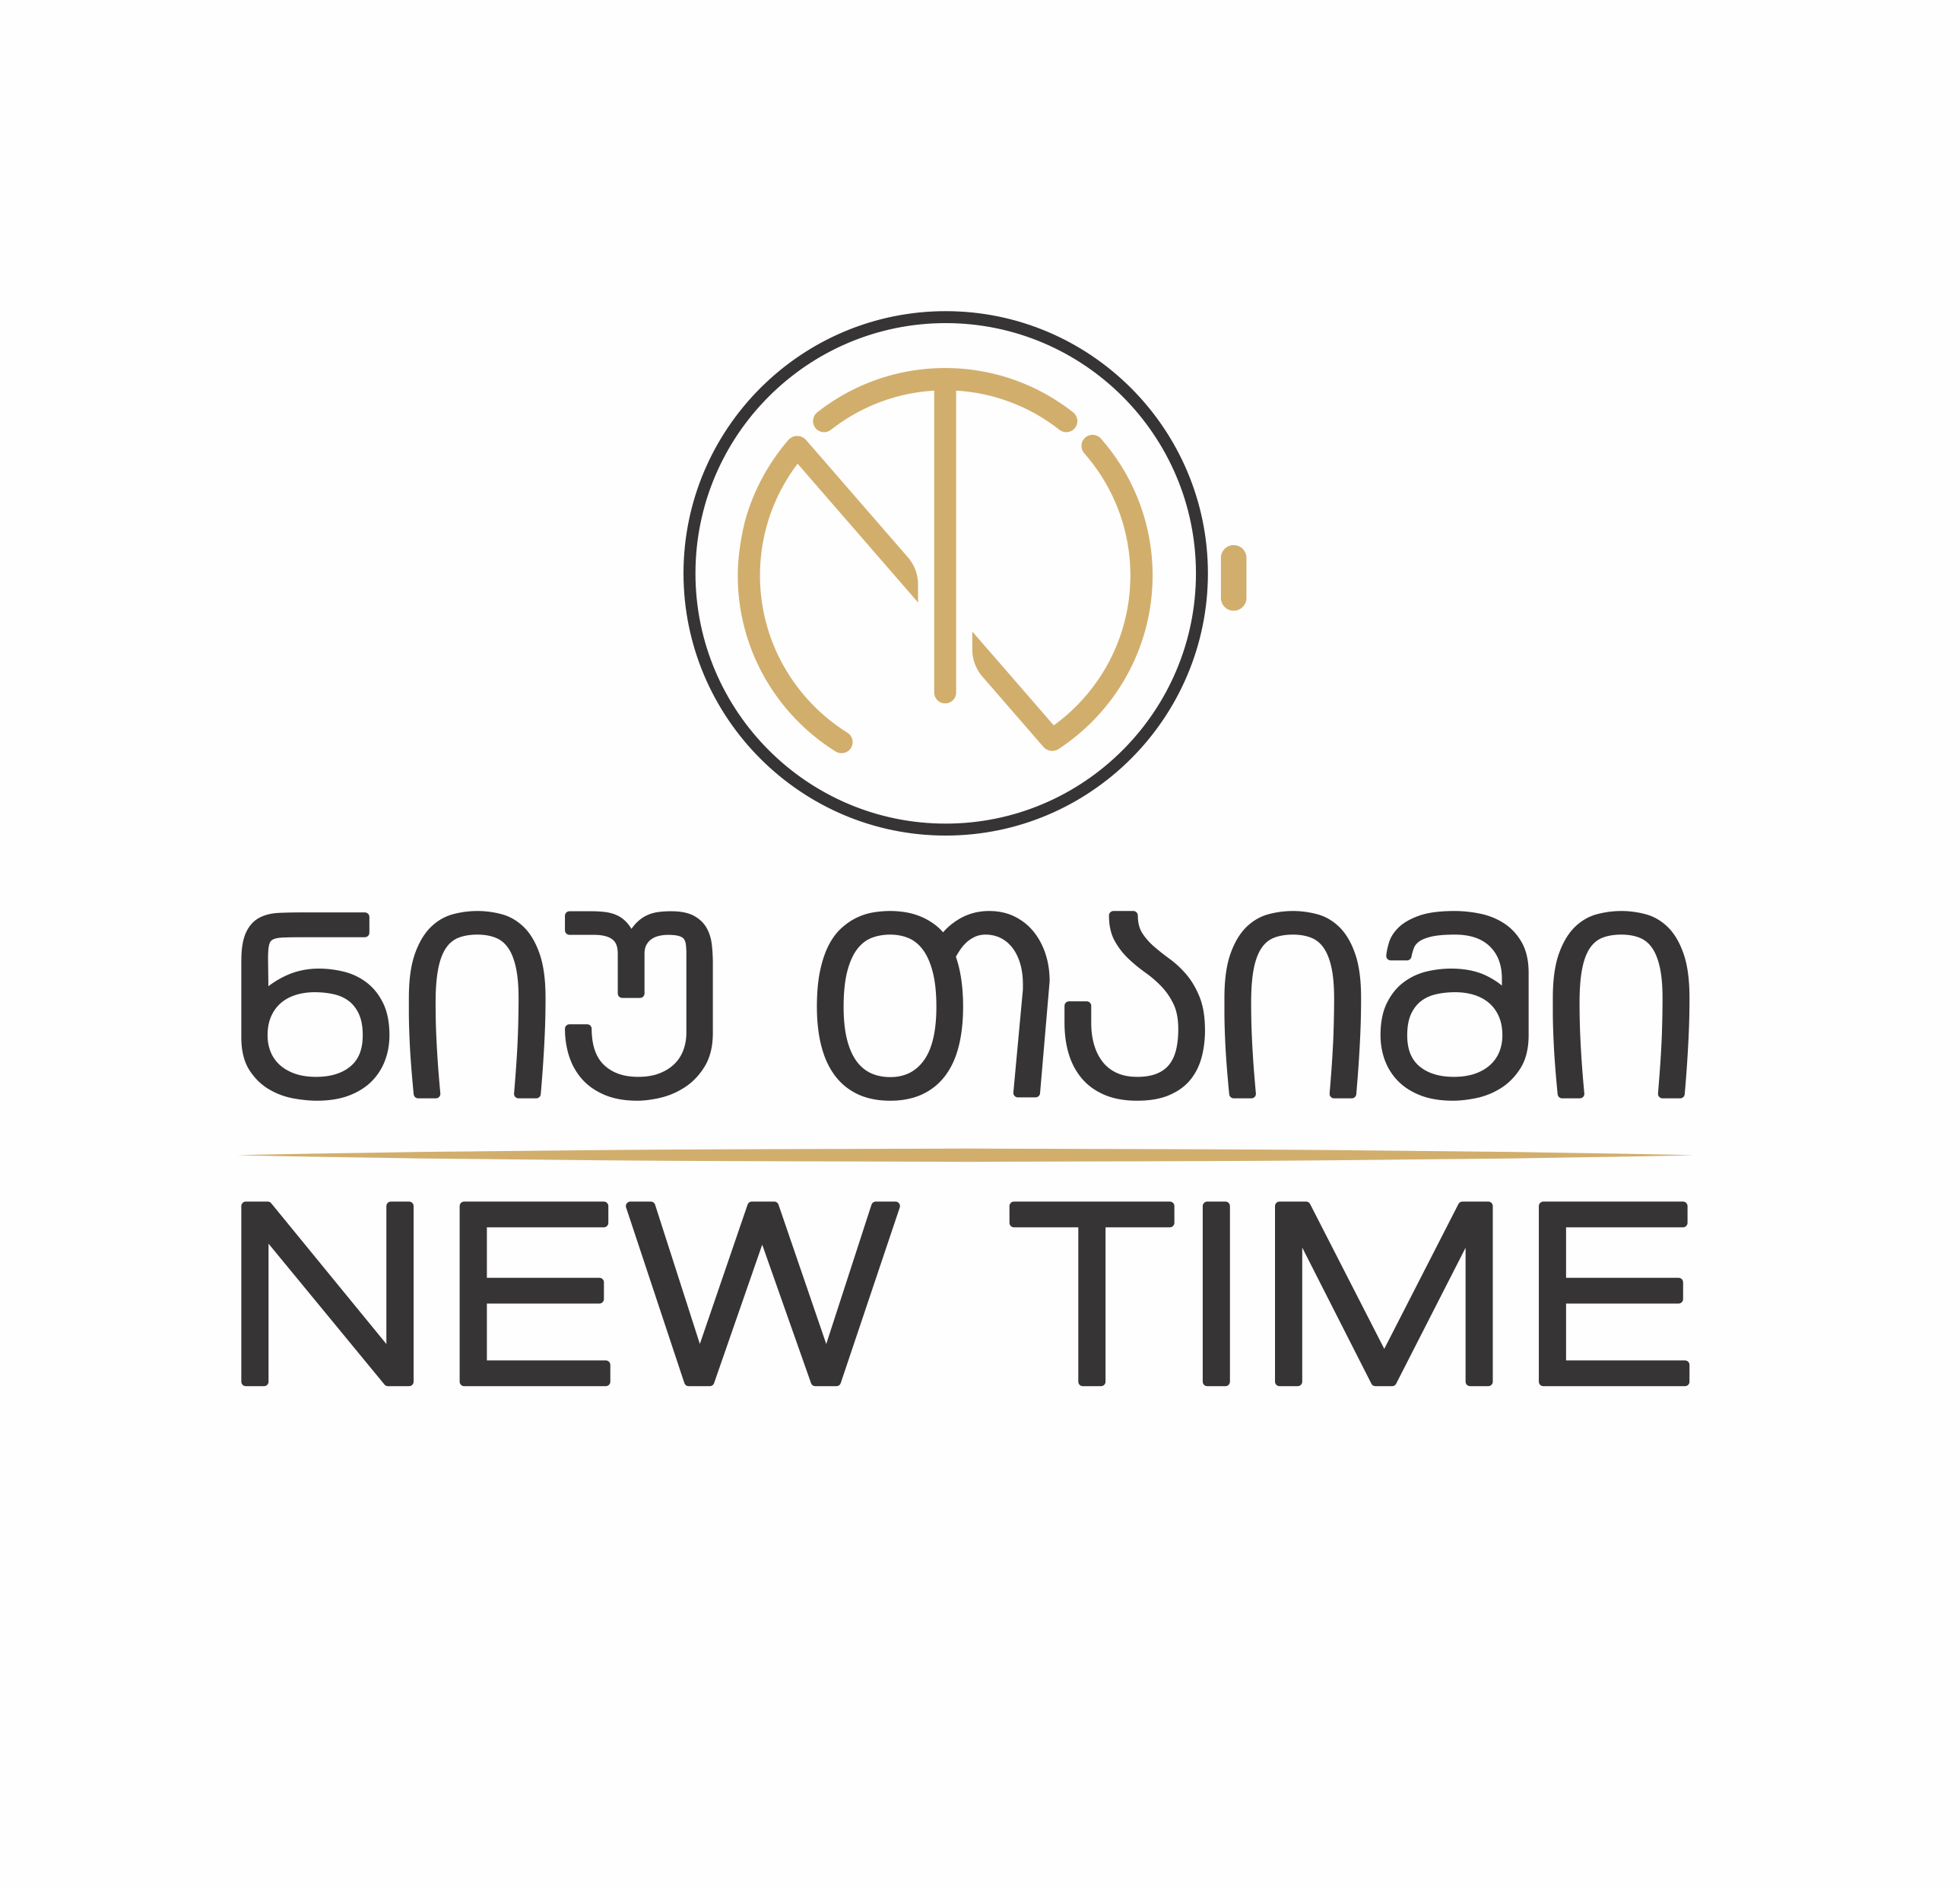 NewTime